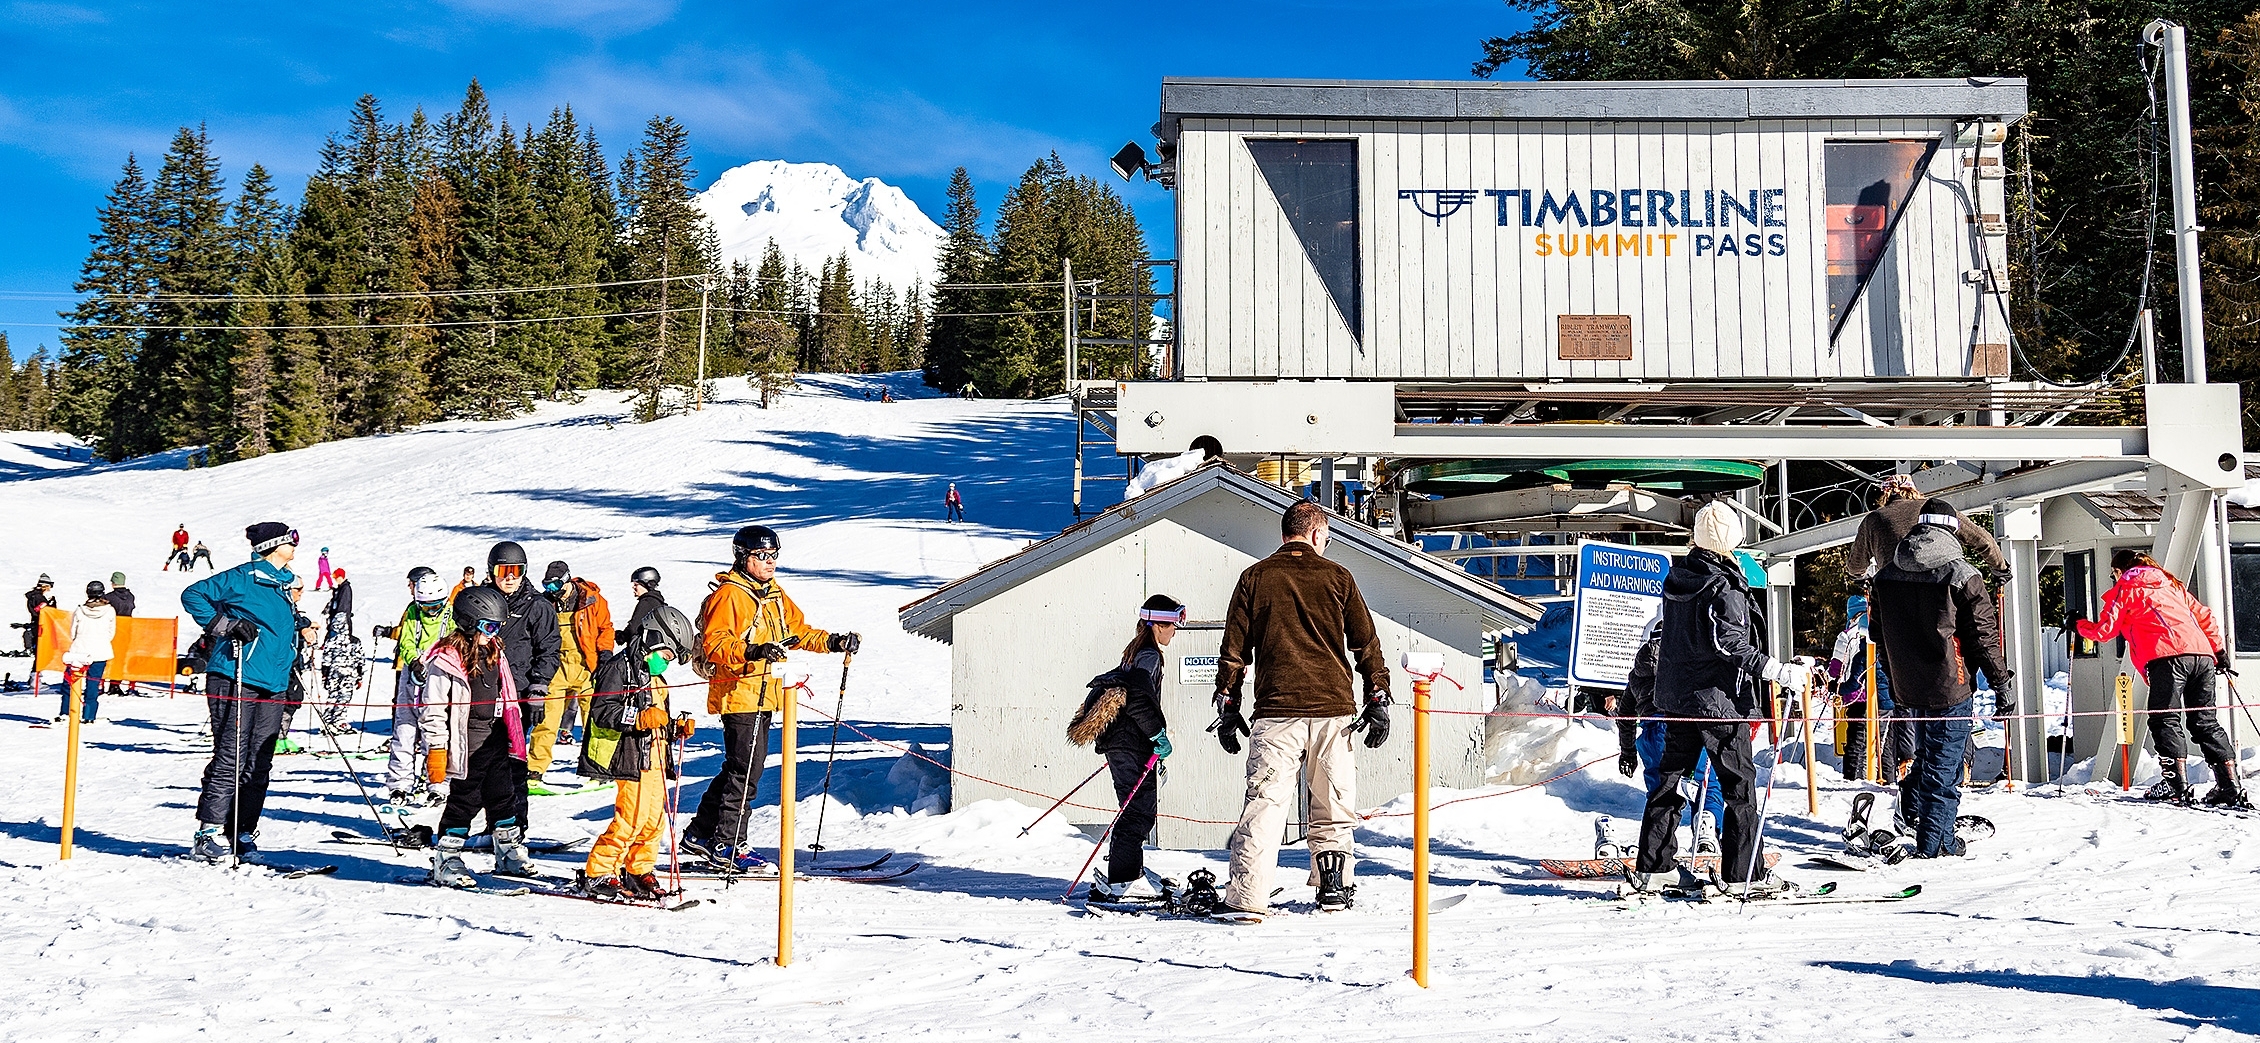 SKIERS AND SNOWBOARDERS IN LINE AT THE TIMBERLINE SUMMIT PASS CHAIRLIFT ON MT. HOOD